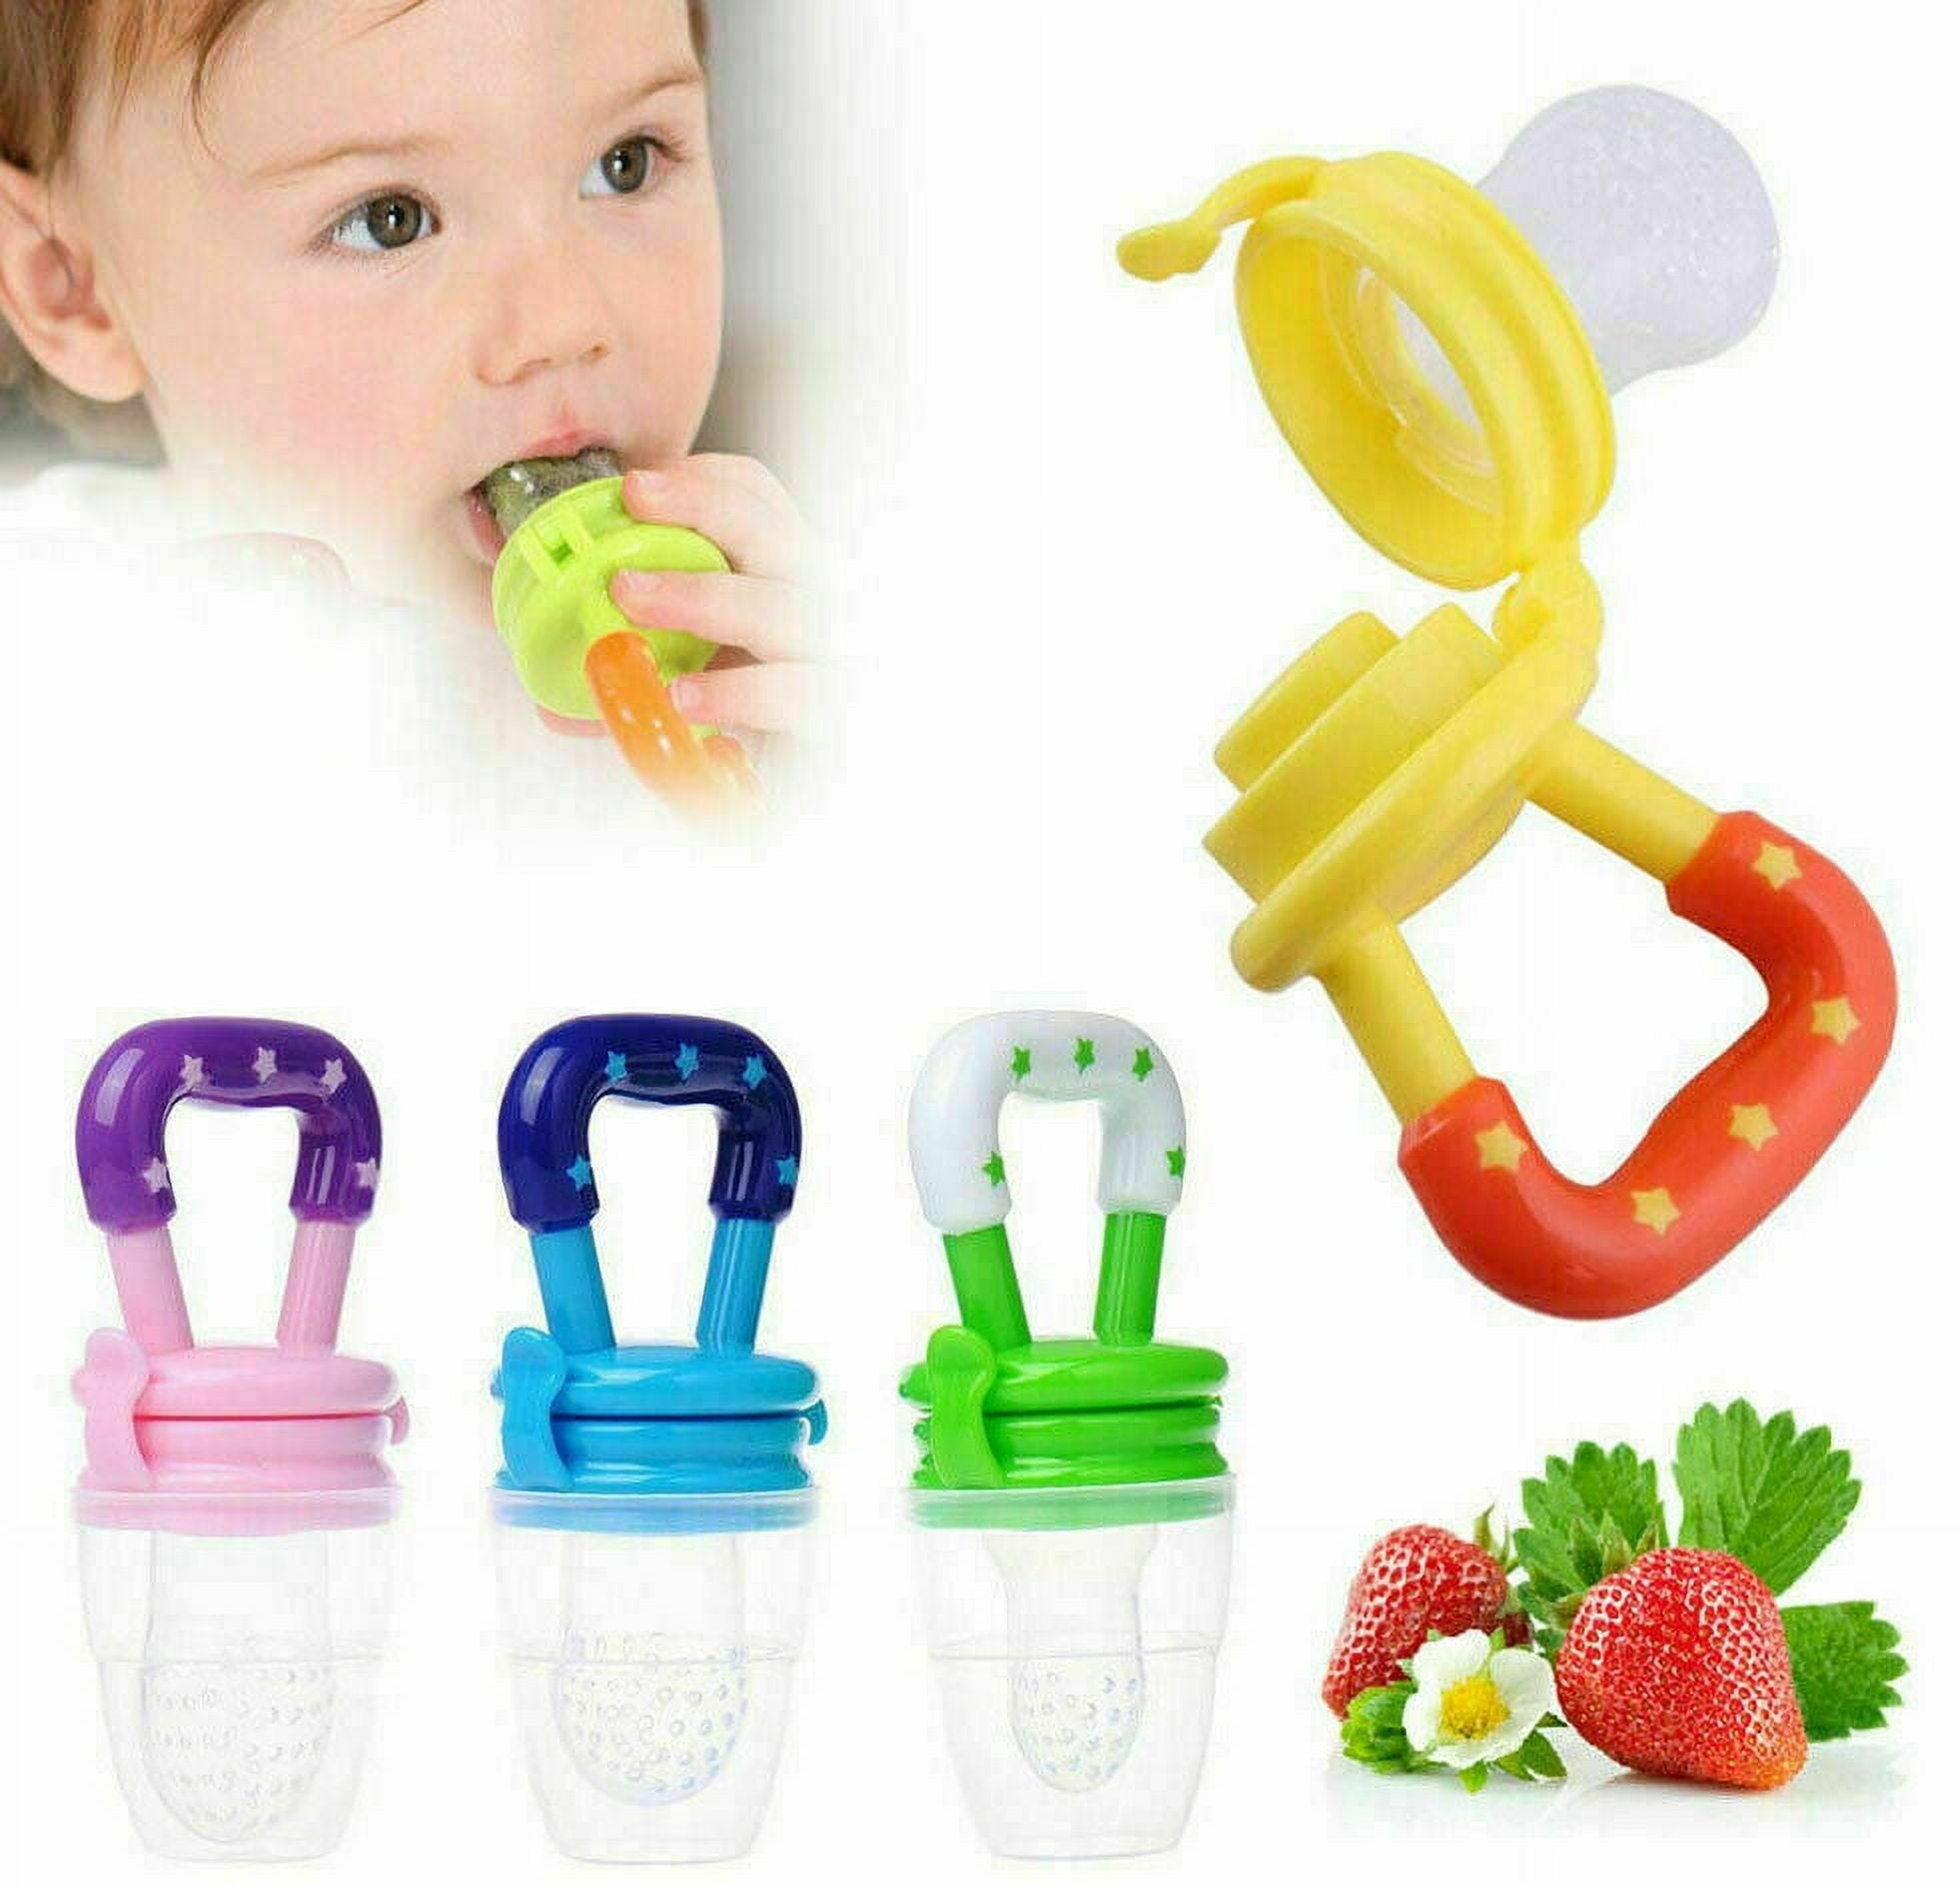 Baby Fruit Feeder Food Feeder Pacifiers Teething Set, Teethers for Purees,  Smoothies, Juices 18pcs by KAILEXBABY 